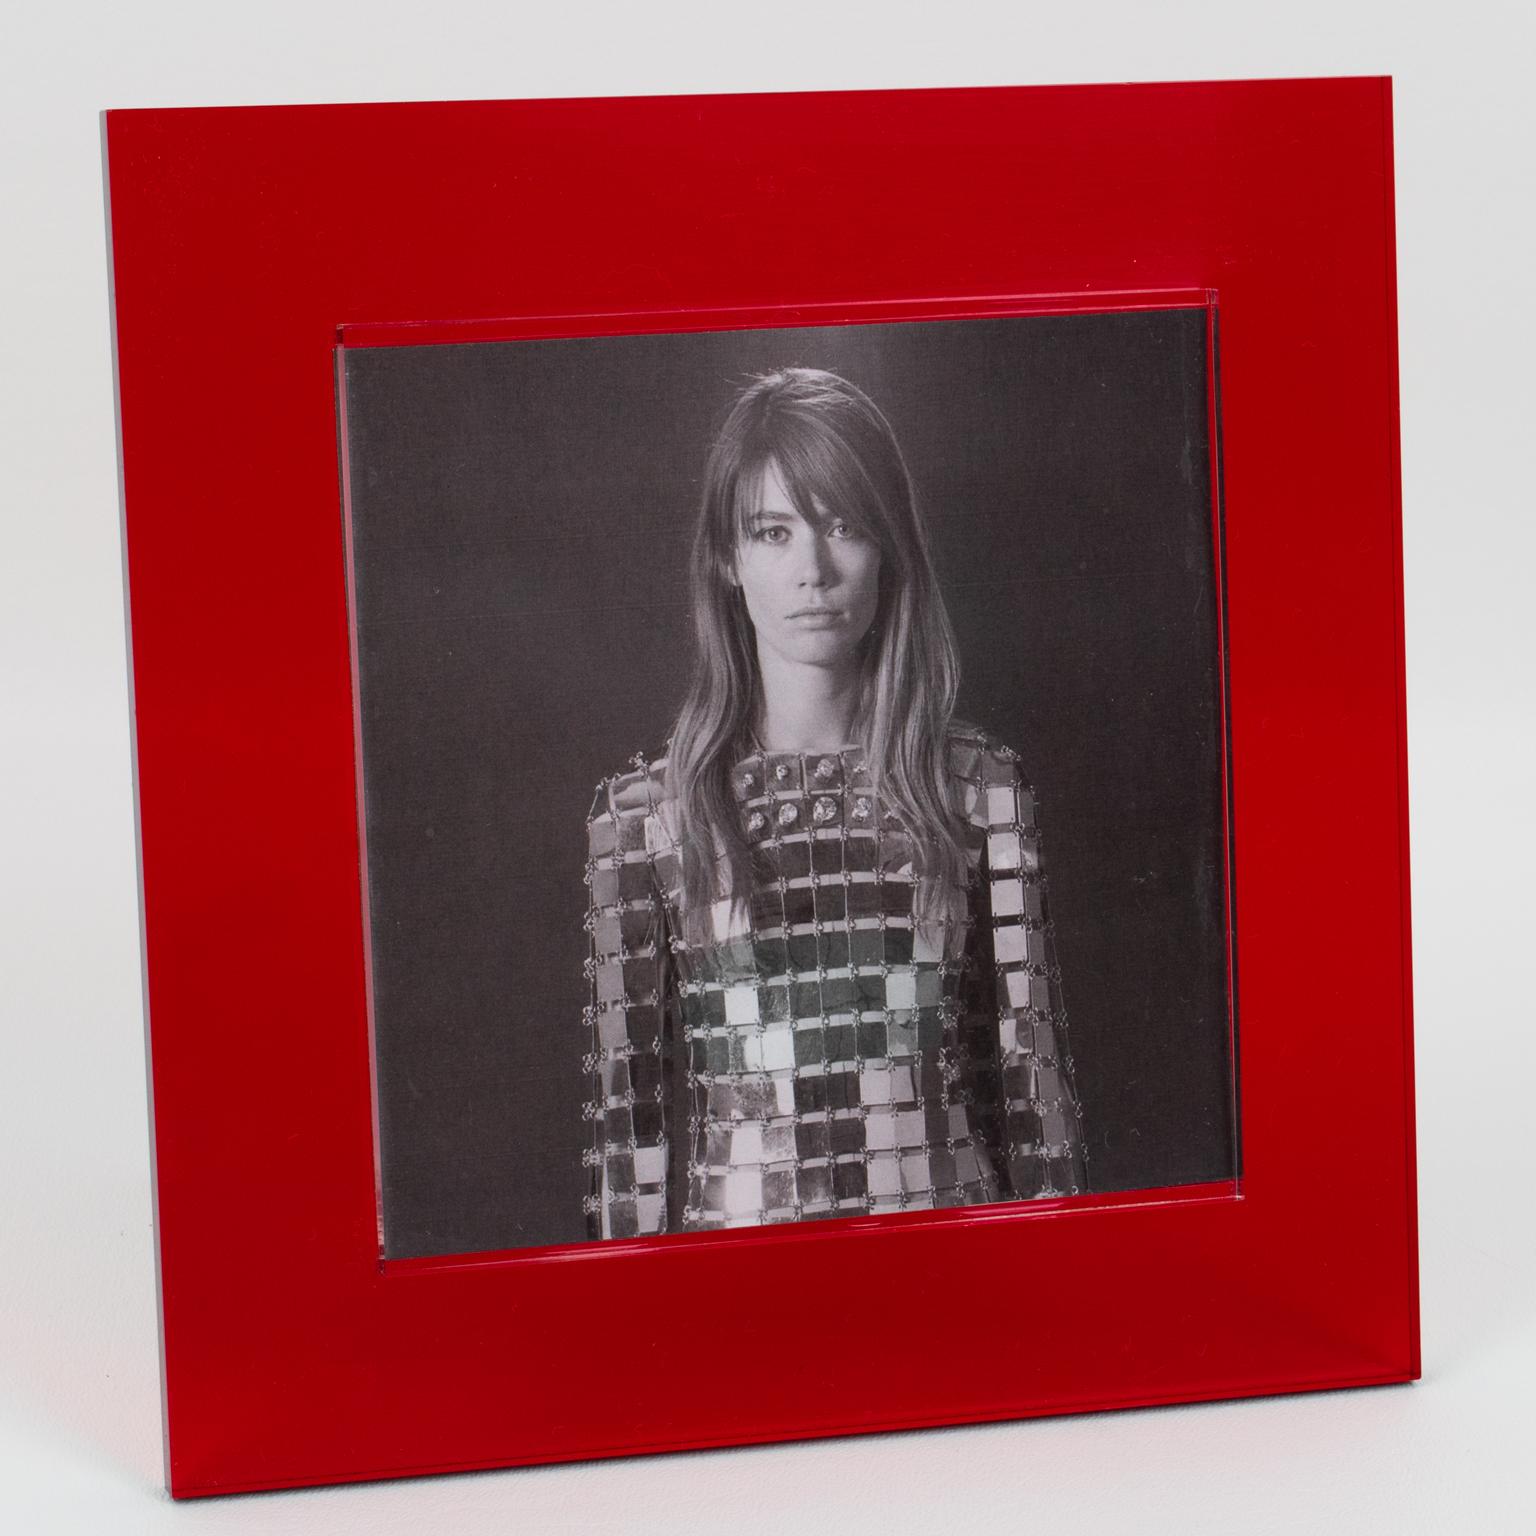 This beautiful Italian 1970s Pop Art modernist Lucite picture photo frame features a thick neon red Lucite slab with a transparent Lucite 